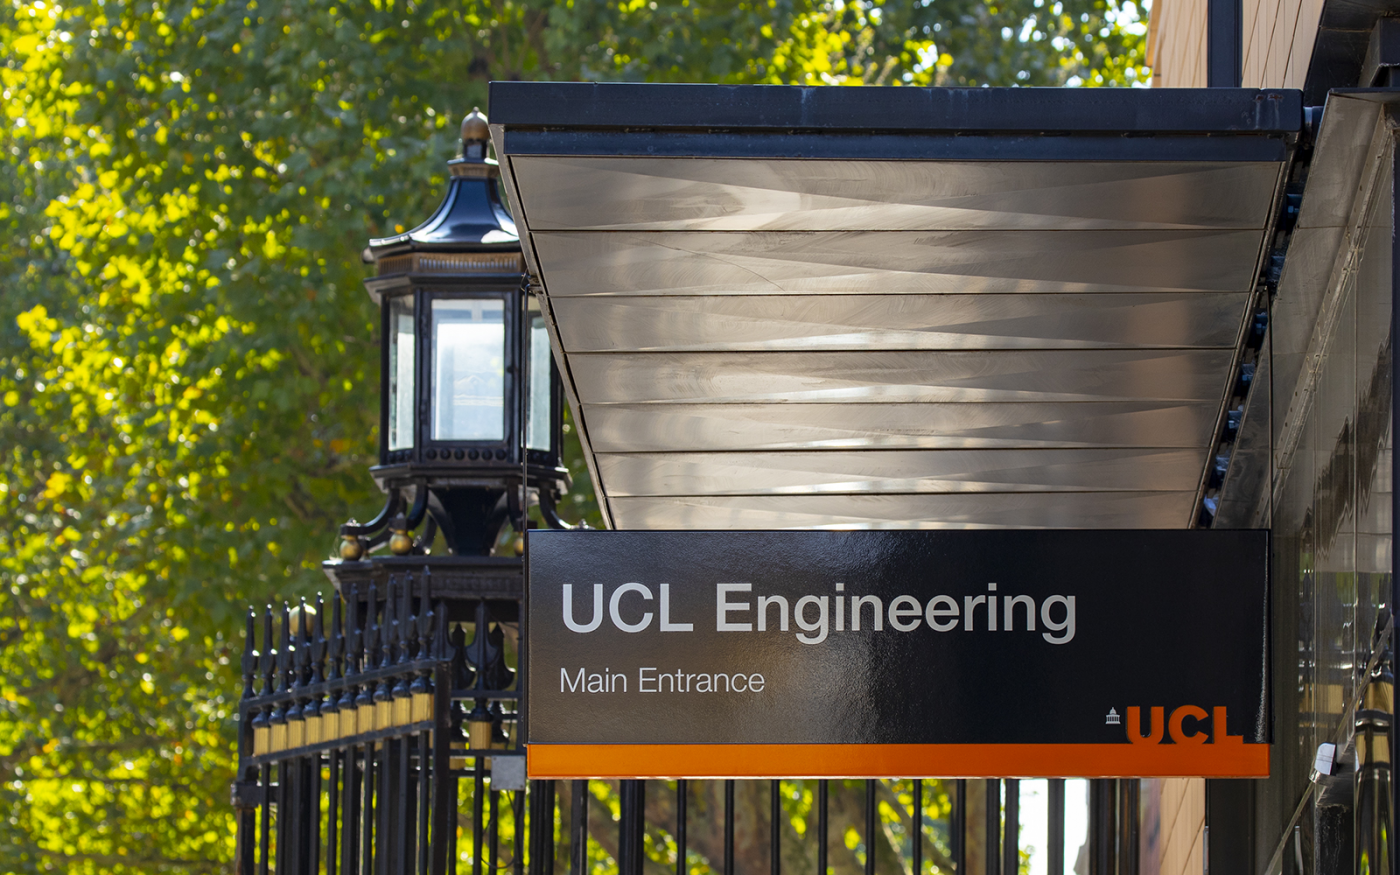 UCL Engineering building main entrance signage. In the background the old classic street lighting, green trees and tall black gated entrance.